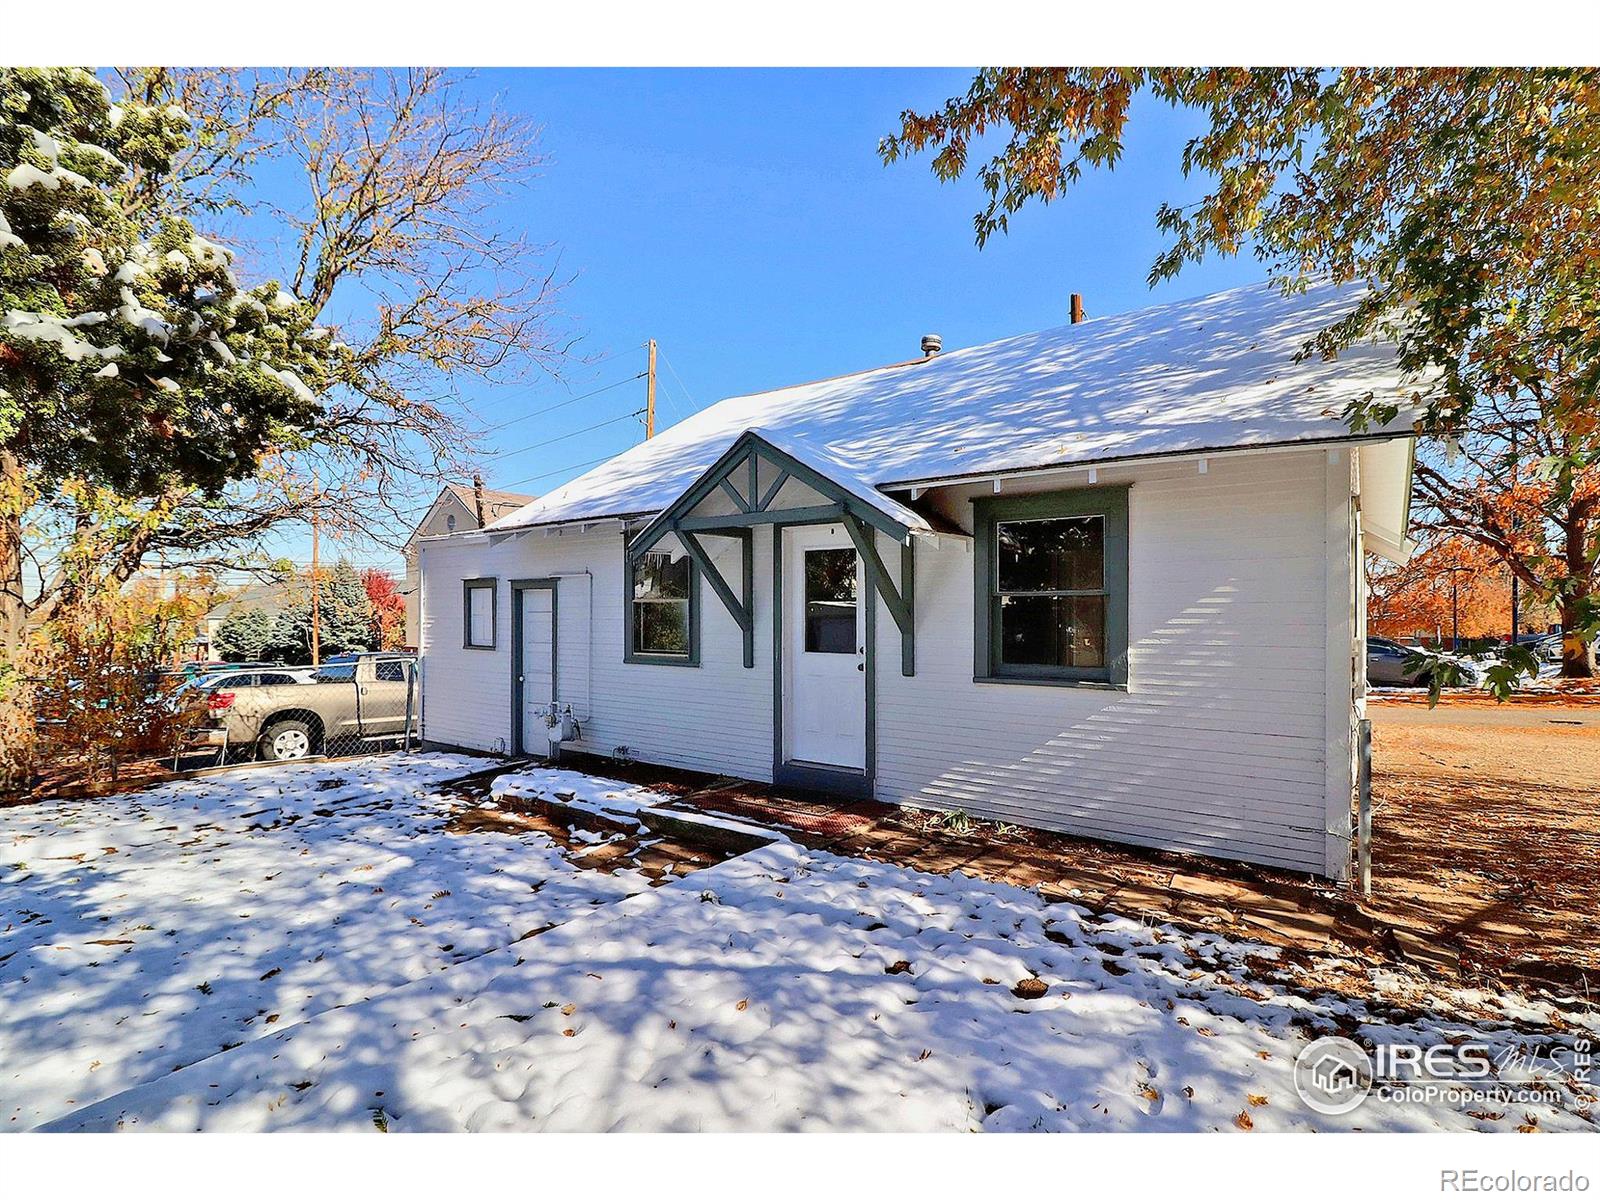 1934  11th Avenue, greeley MLS: 456789999046 Beds: 2 Baths: 1 Price: $275,000